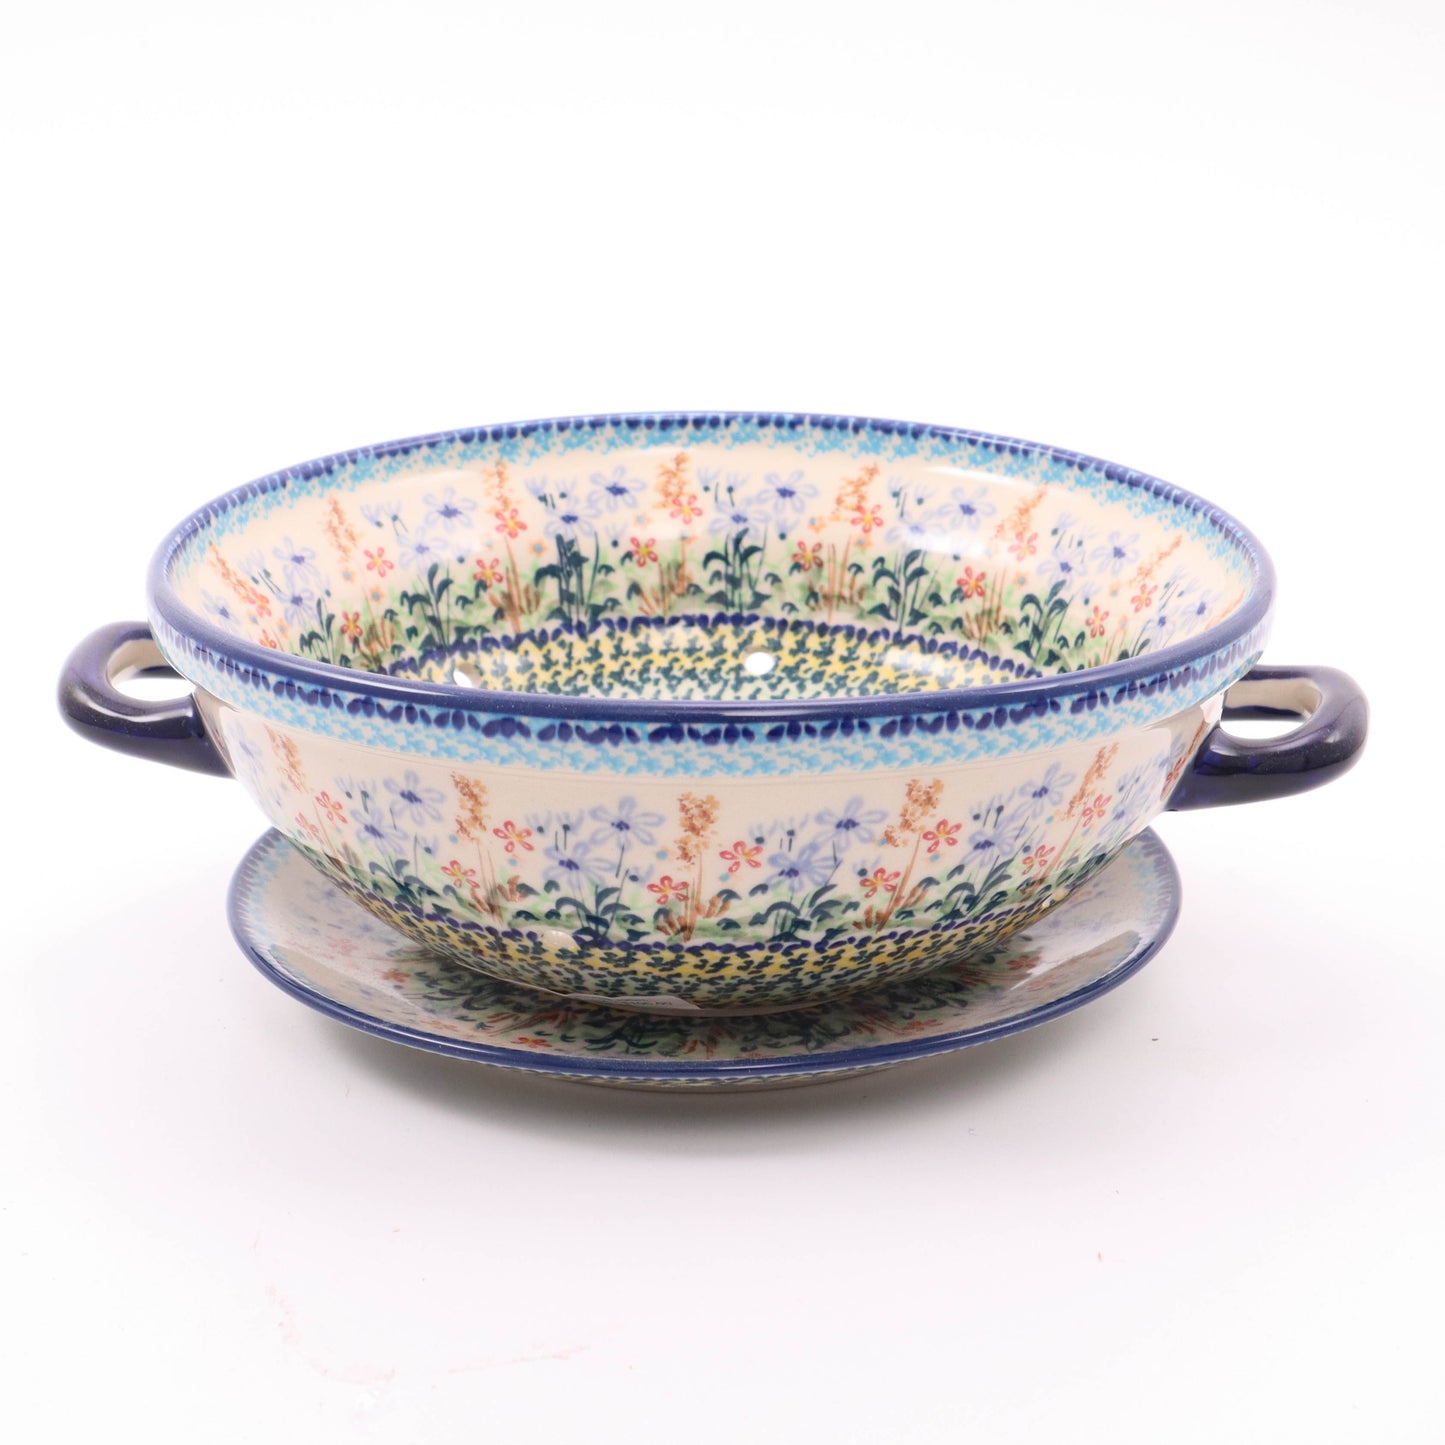 9.5" Colander with Handles and Plate.  Pattern: Floral Harvest